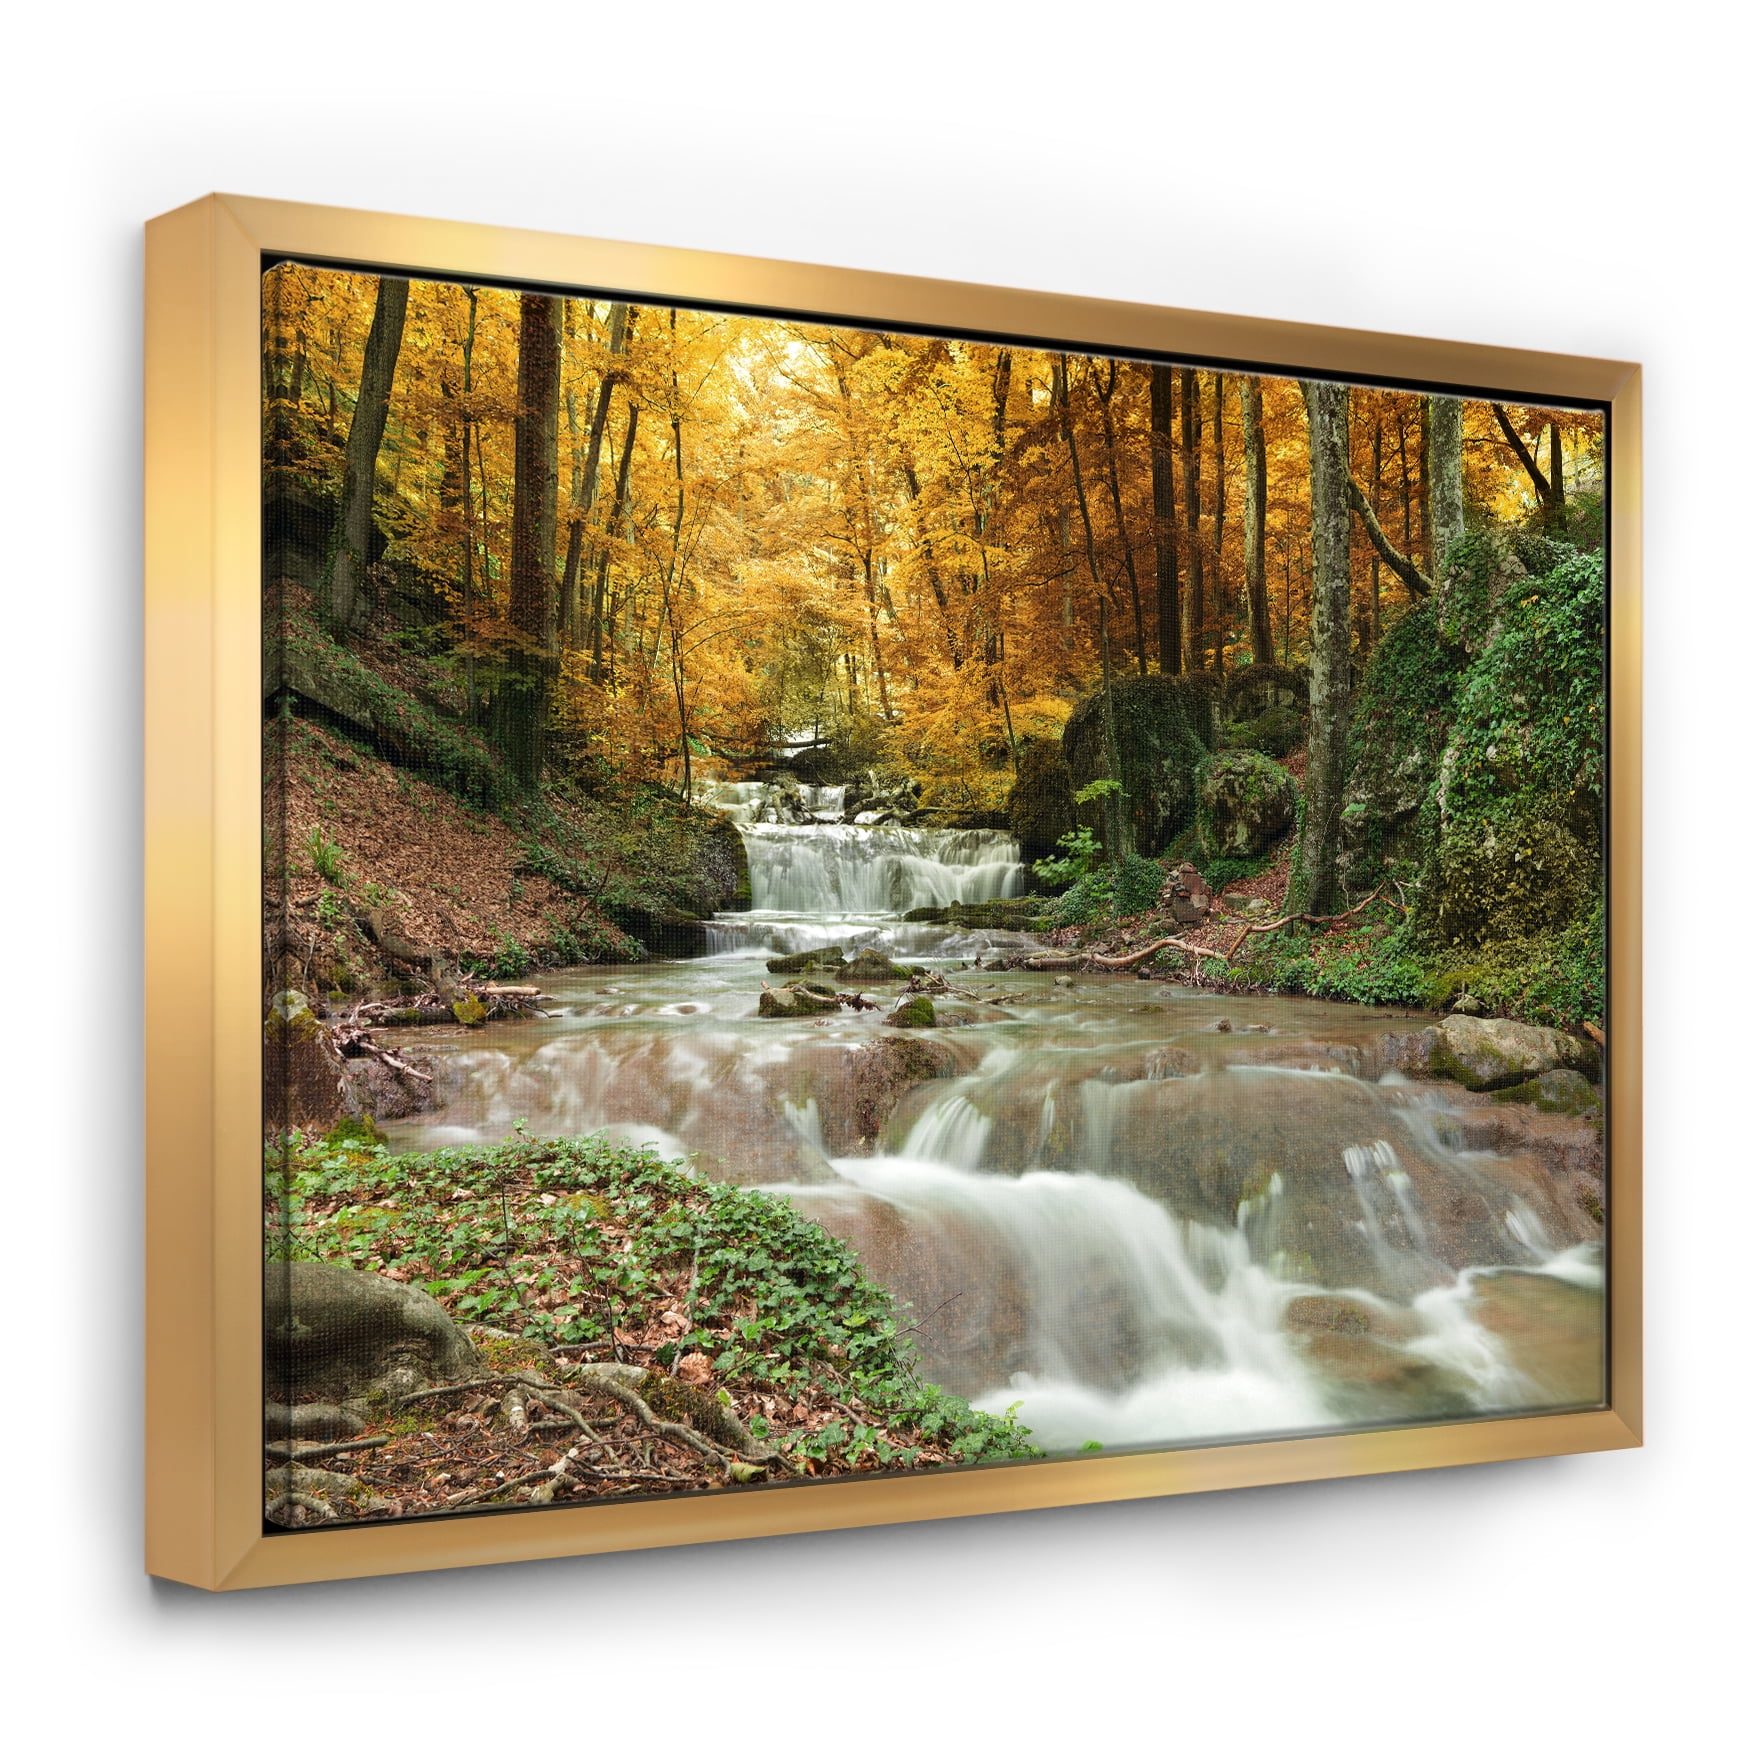 16x20 Wall Decor Waterfall and Stream in The Tropical Forest Scenery Art Print 